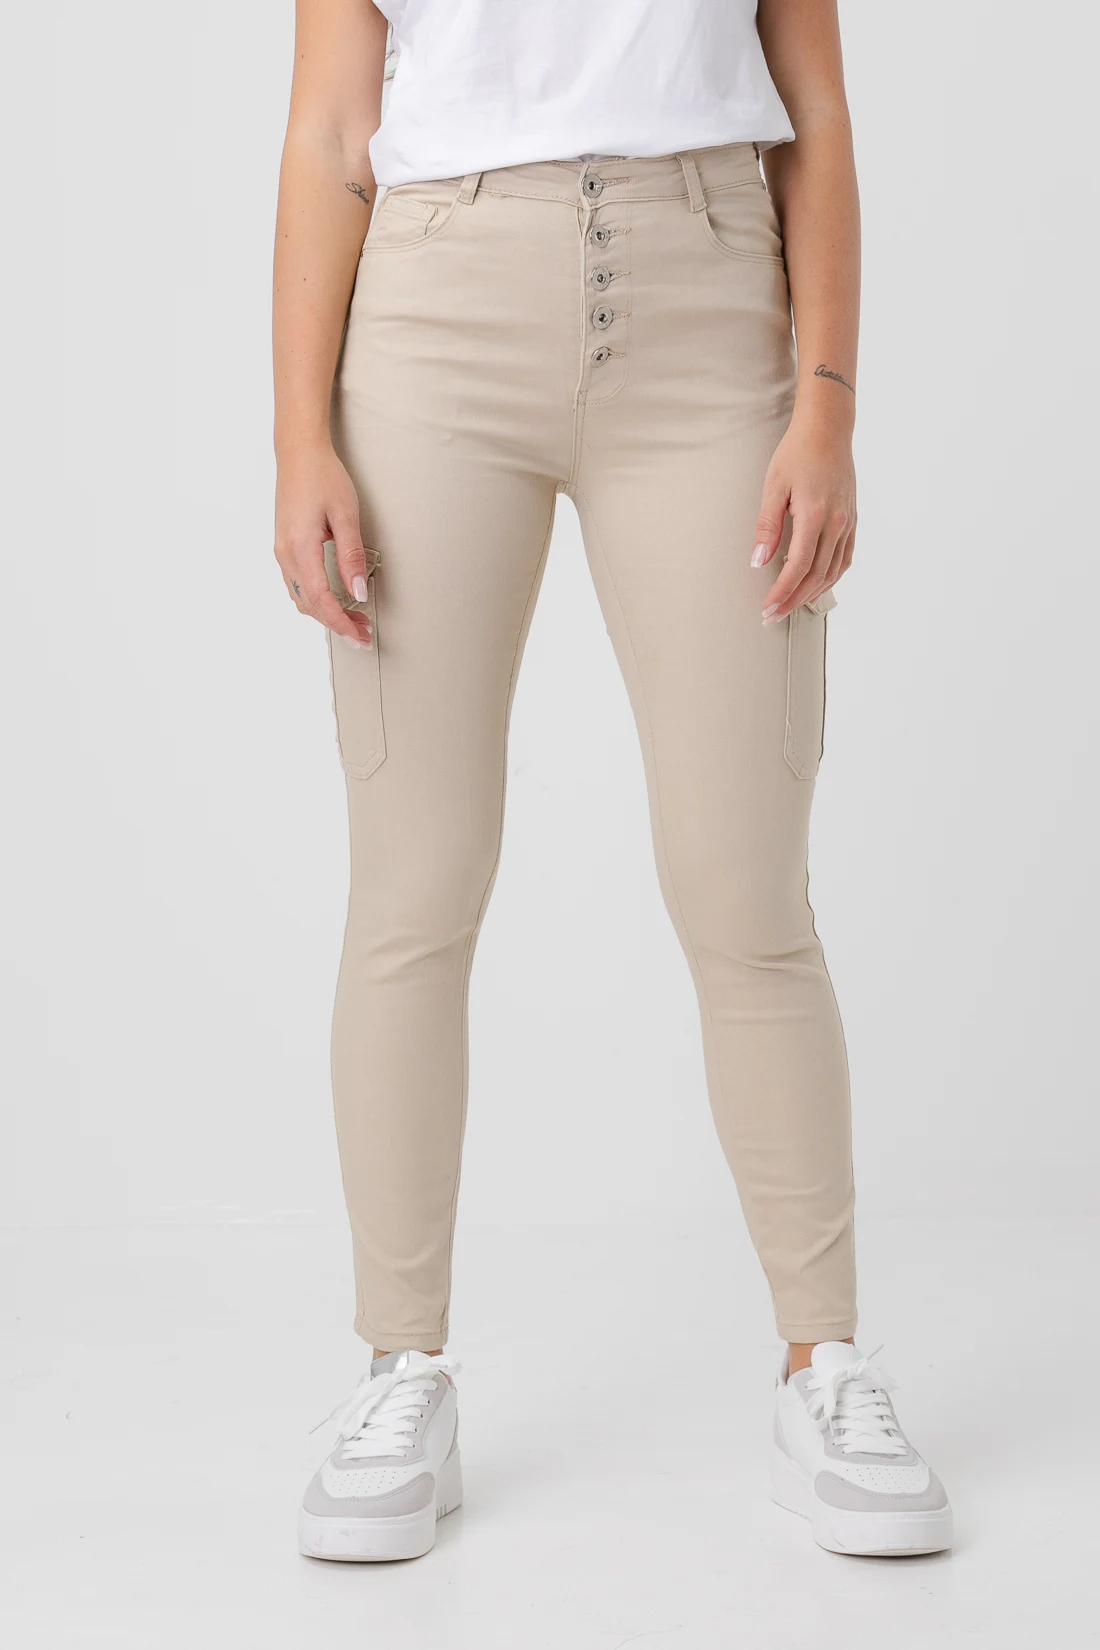 POMBUL TROUSERS - CAMEL